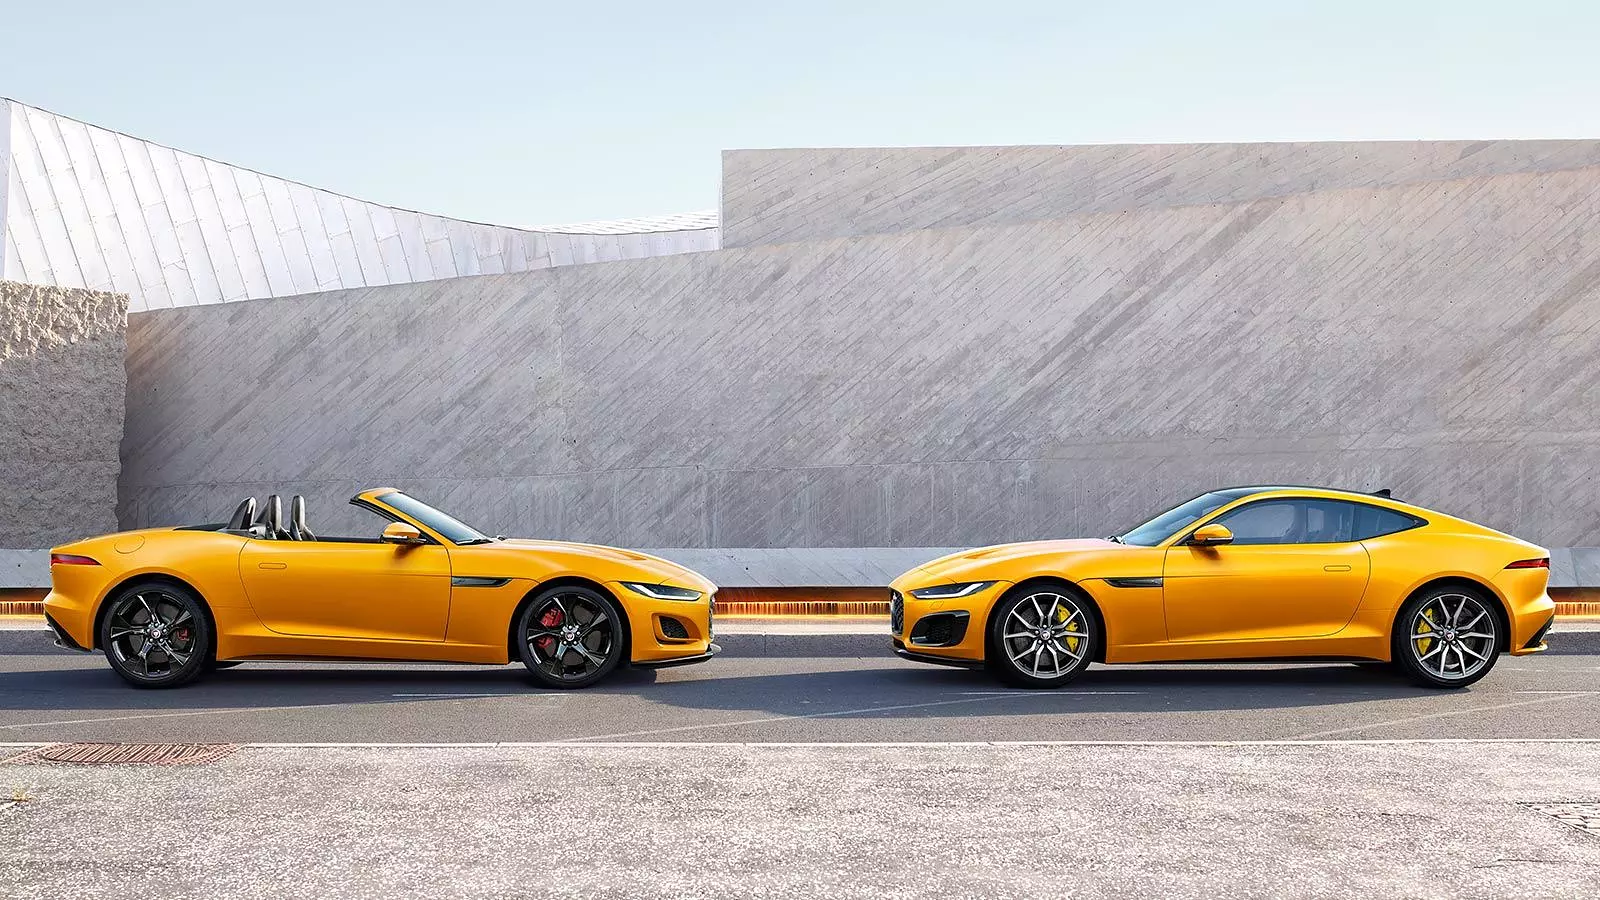 Dos F-Type - convertible y coupe